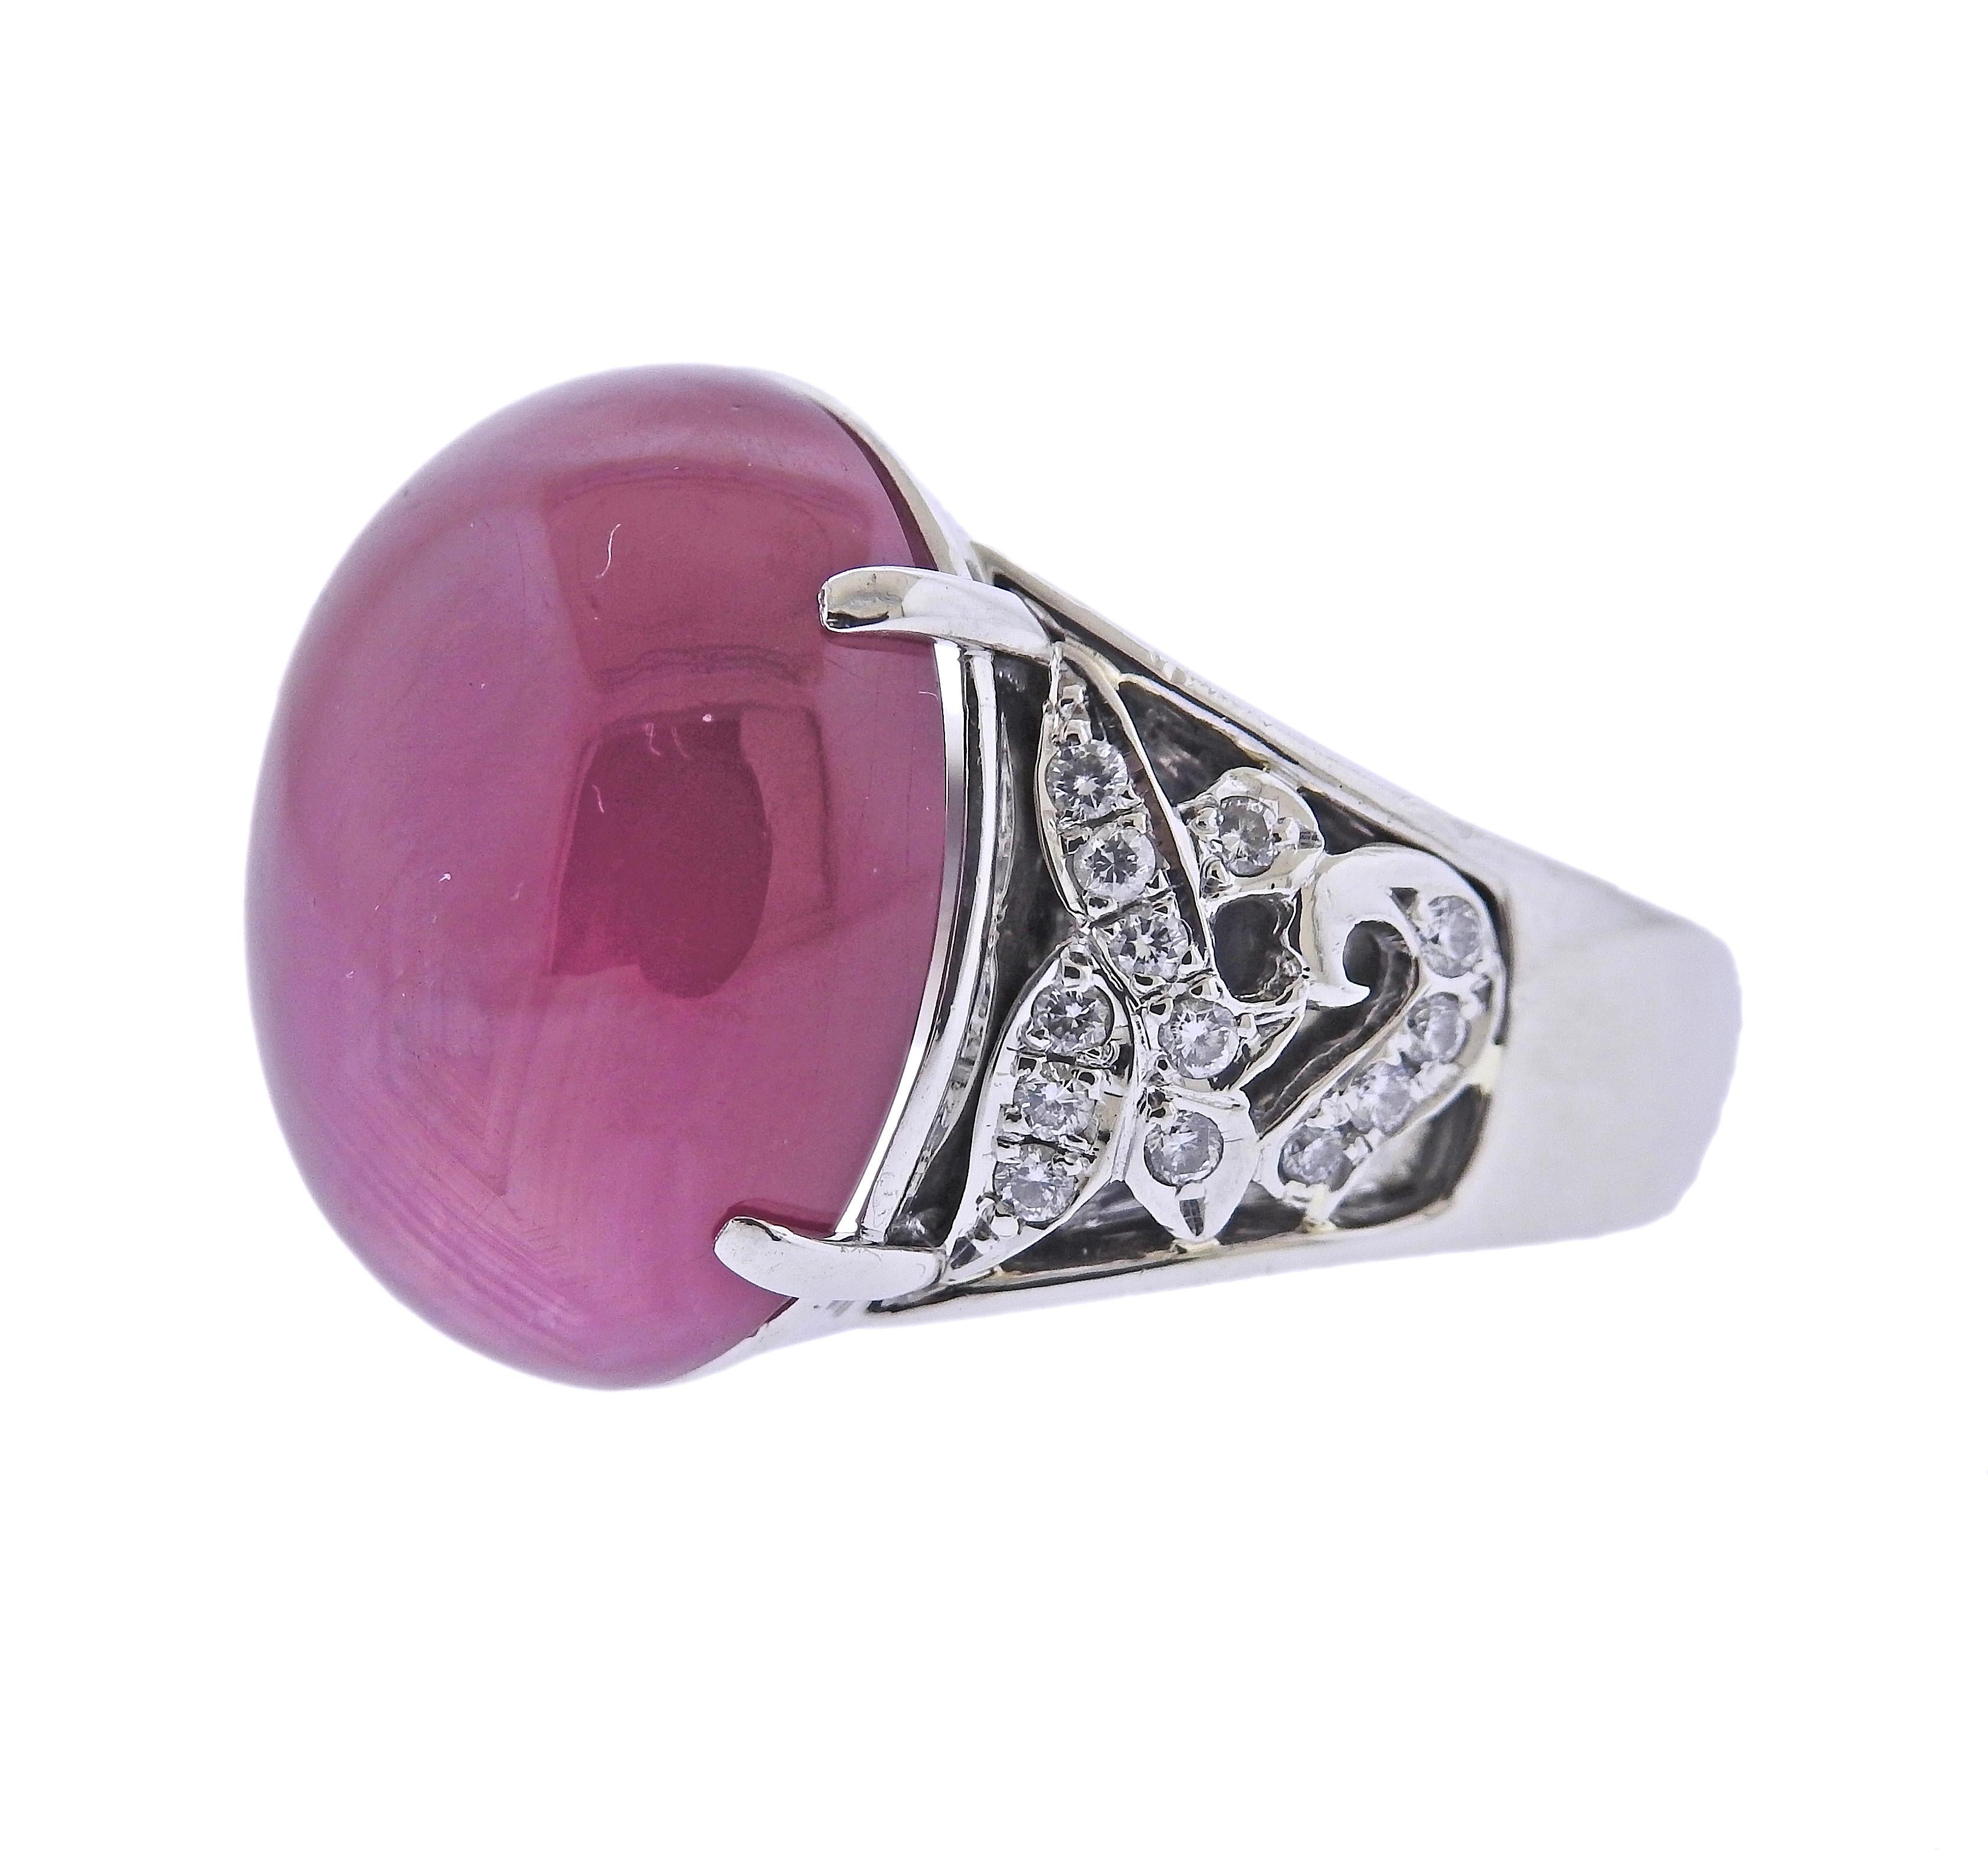 Impressive platinum ring, set with center 24.61ct Burma ruby cabochon (stone measures approx. 17.7 x 14.9 x 7.9mm), surrounded with 0.26ctw in diamonds. Ring size - 5.5. Marked: Pt900, 24.61, D026. Weight - 16.5 grams. 